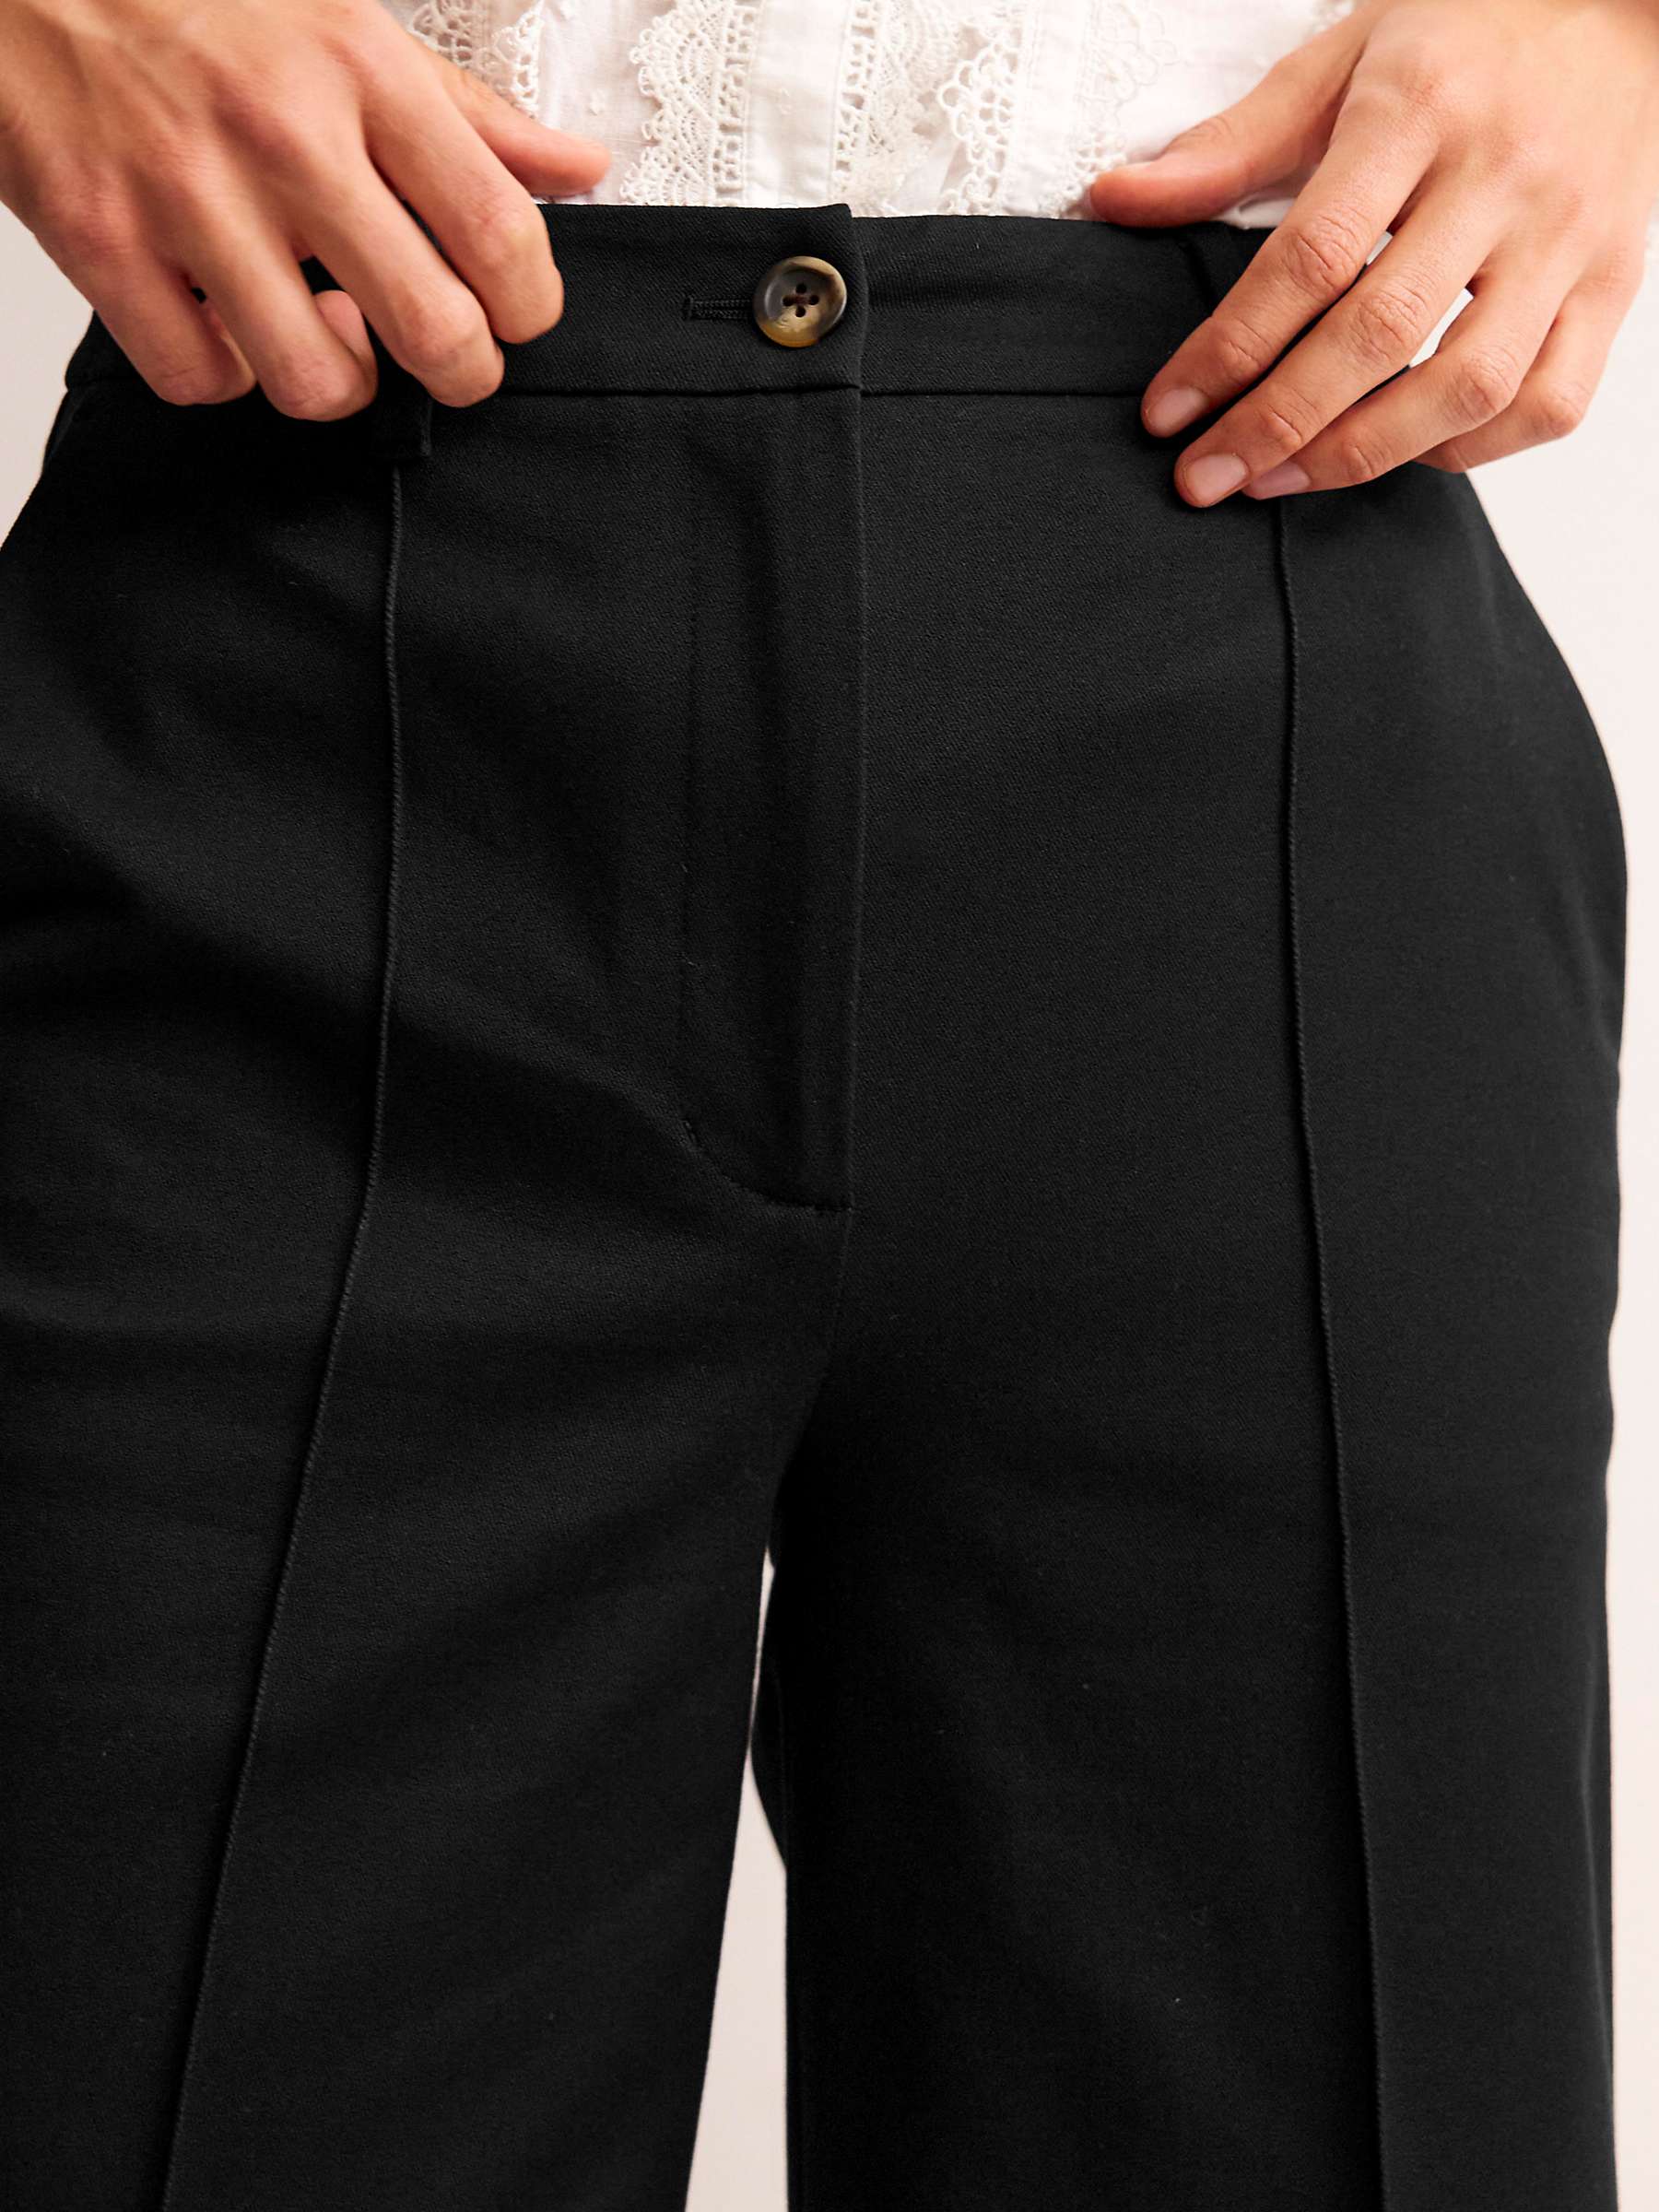 Buy Boden Wide Leg Cropped Trousers, Black Online at johnlewis.com